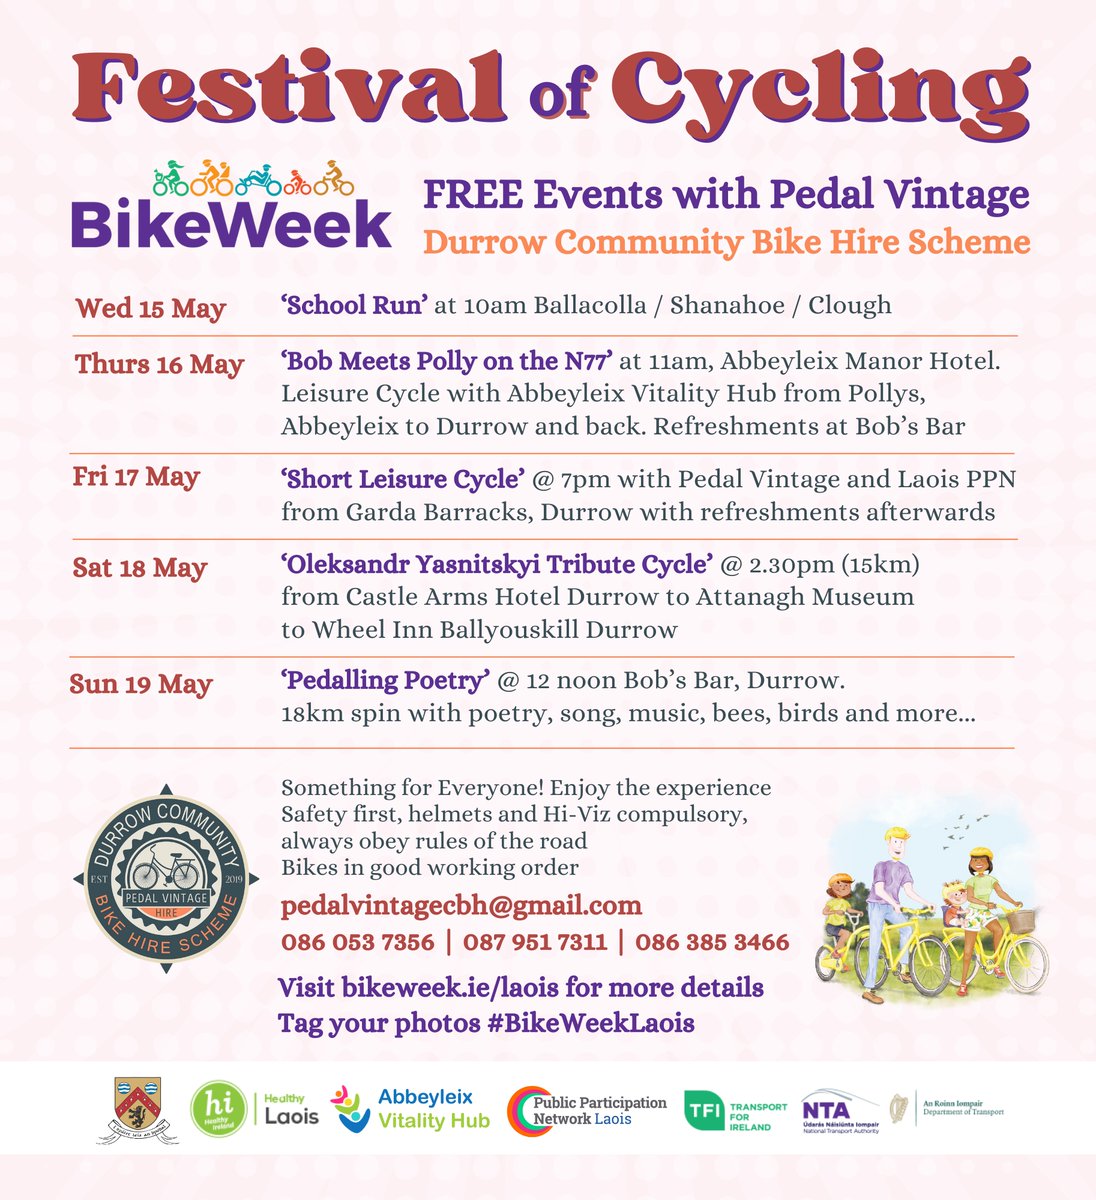 Some fantastic events with Pedal Vintage so far for #BikeWeek, and plenty more to come! #BikeWeekLaois 🚵🏻‍♀️🚵🏻🚴🏻